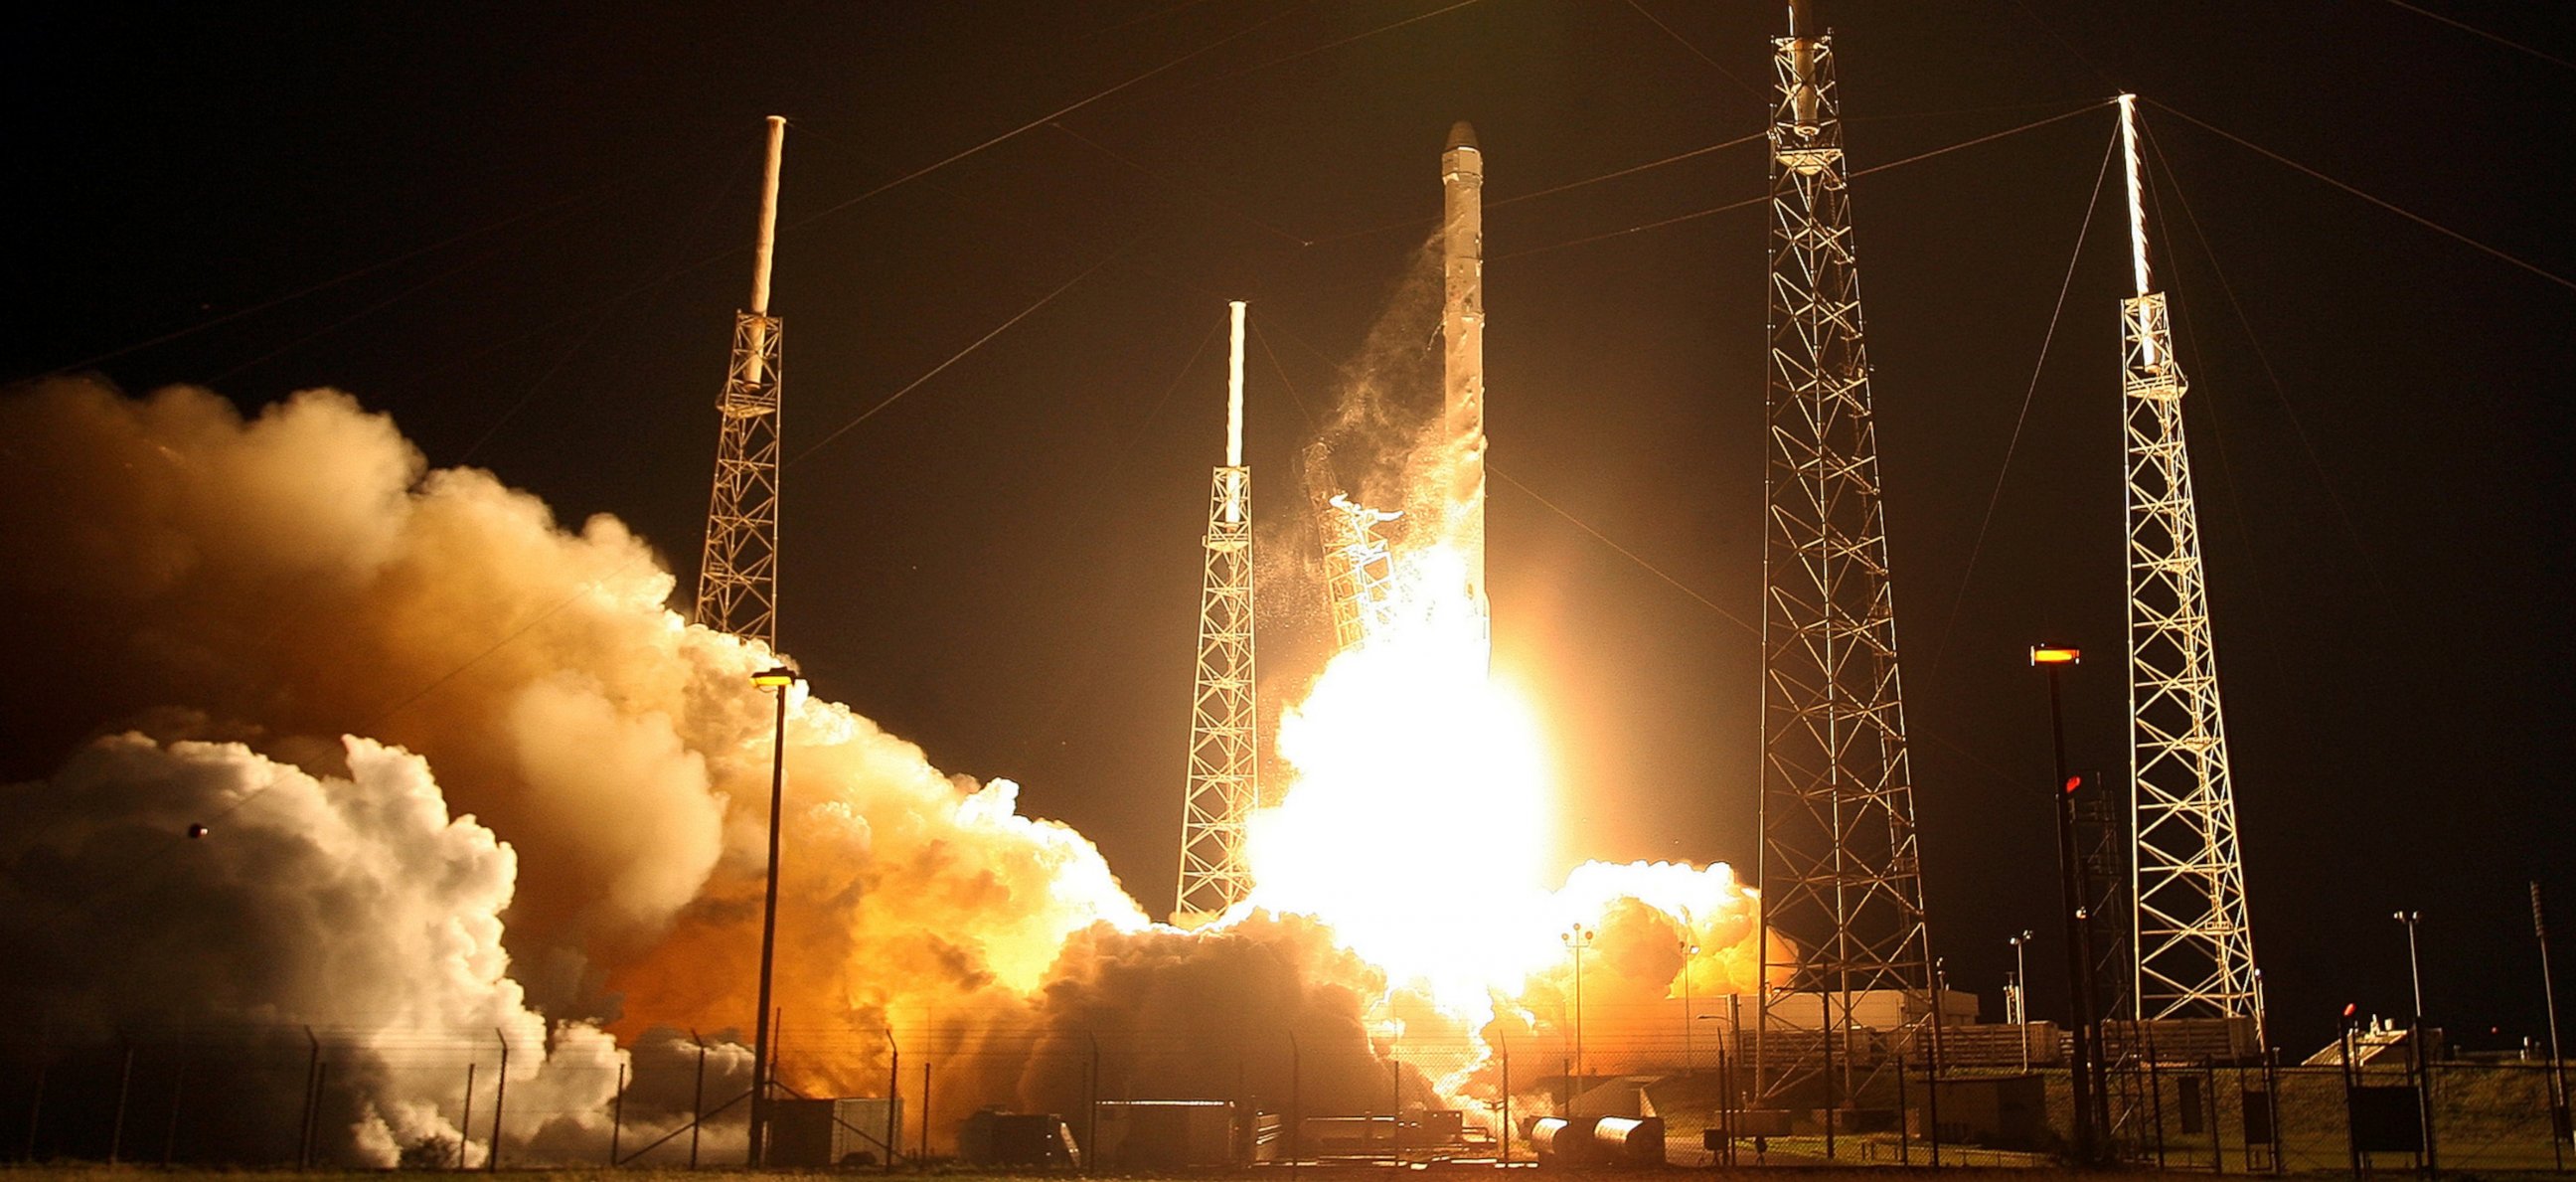 PHOTO: A SpaceX Falcon 9 blasts off launchPad 40 in Cape Canaveral, Fla., early Saturday, Jan. 10, 2015 to deliver supplies to the International Space Station.